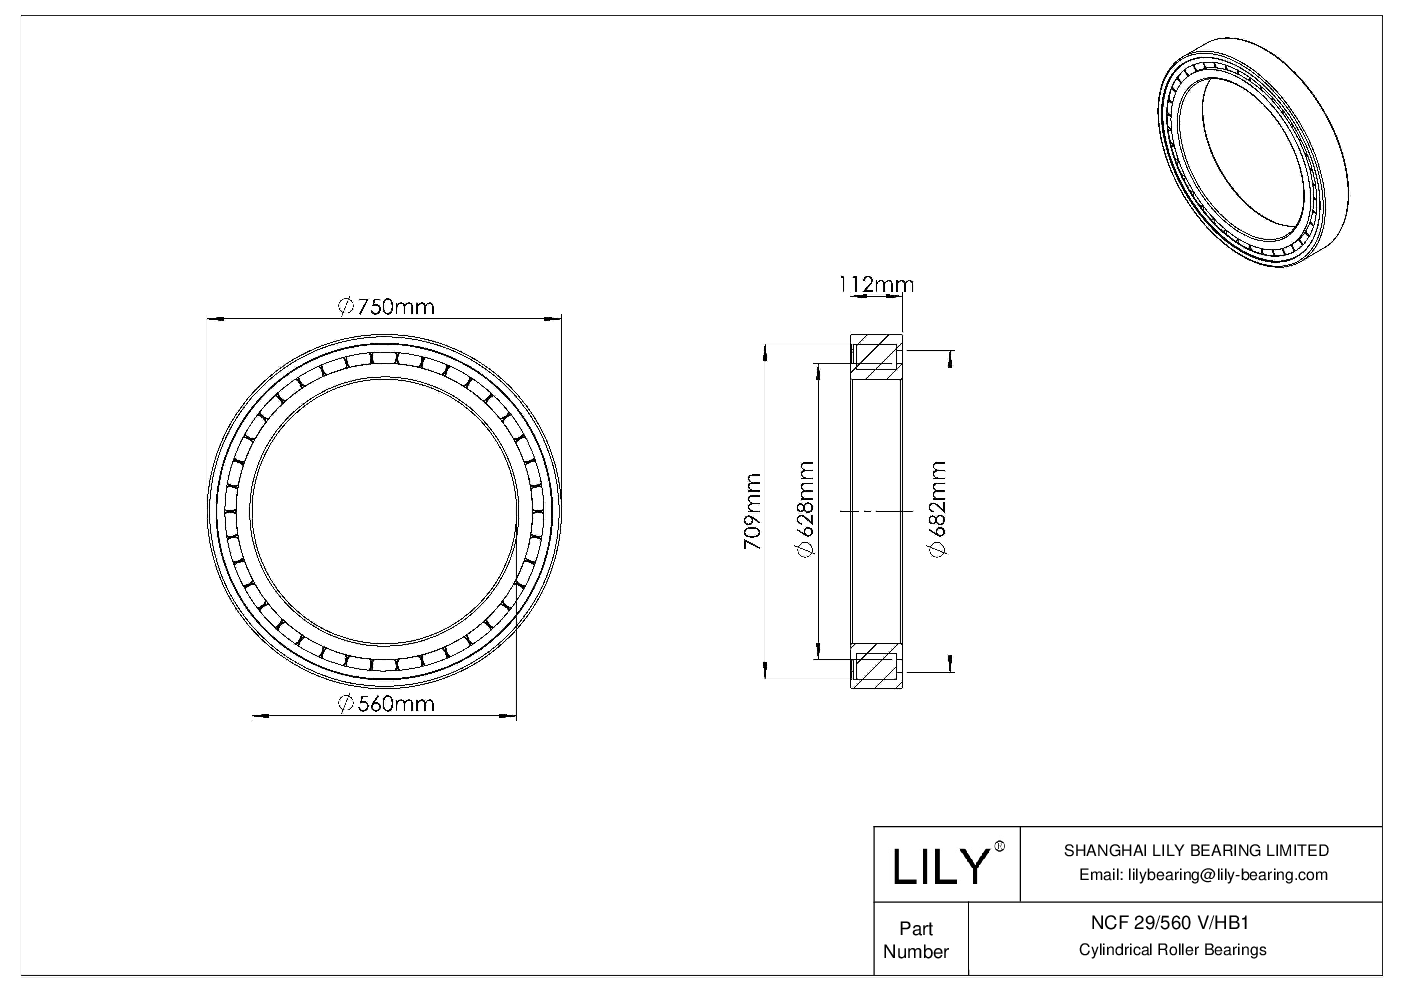 NCF 29/560 V/HB1 Single Row Full Complement Cylindrical Roller Bearings cad drawing